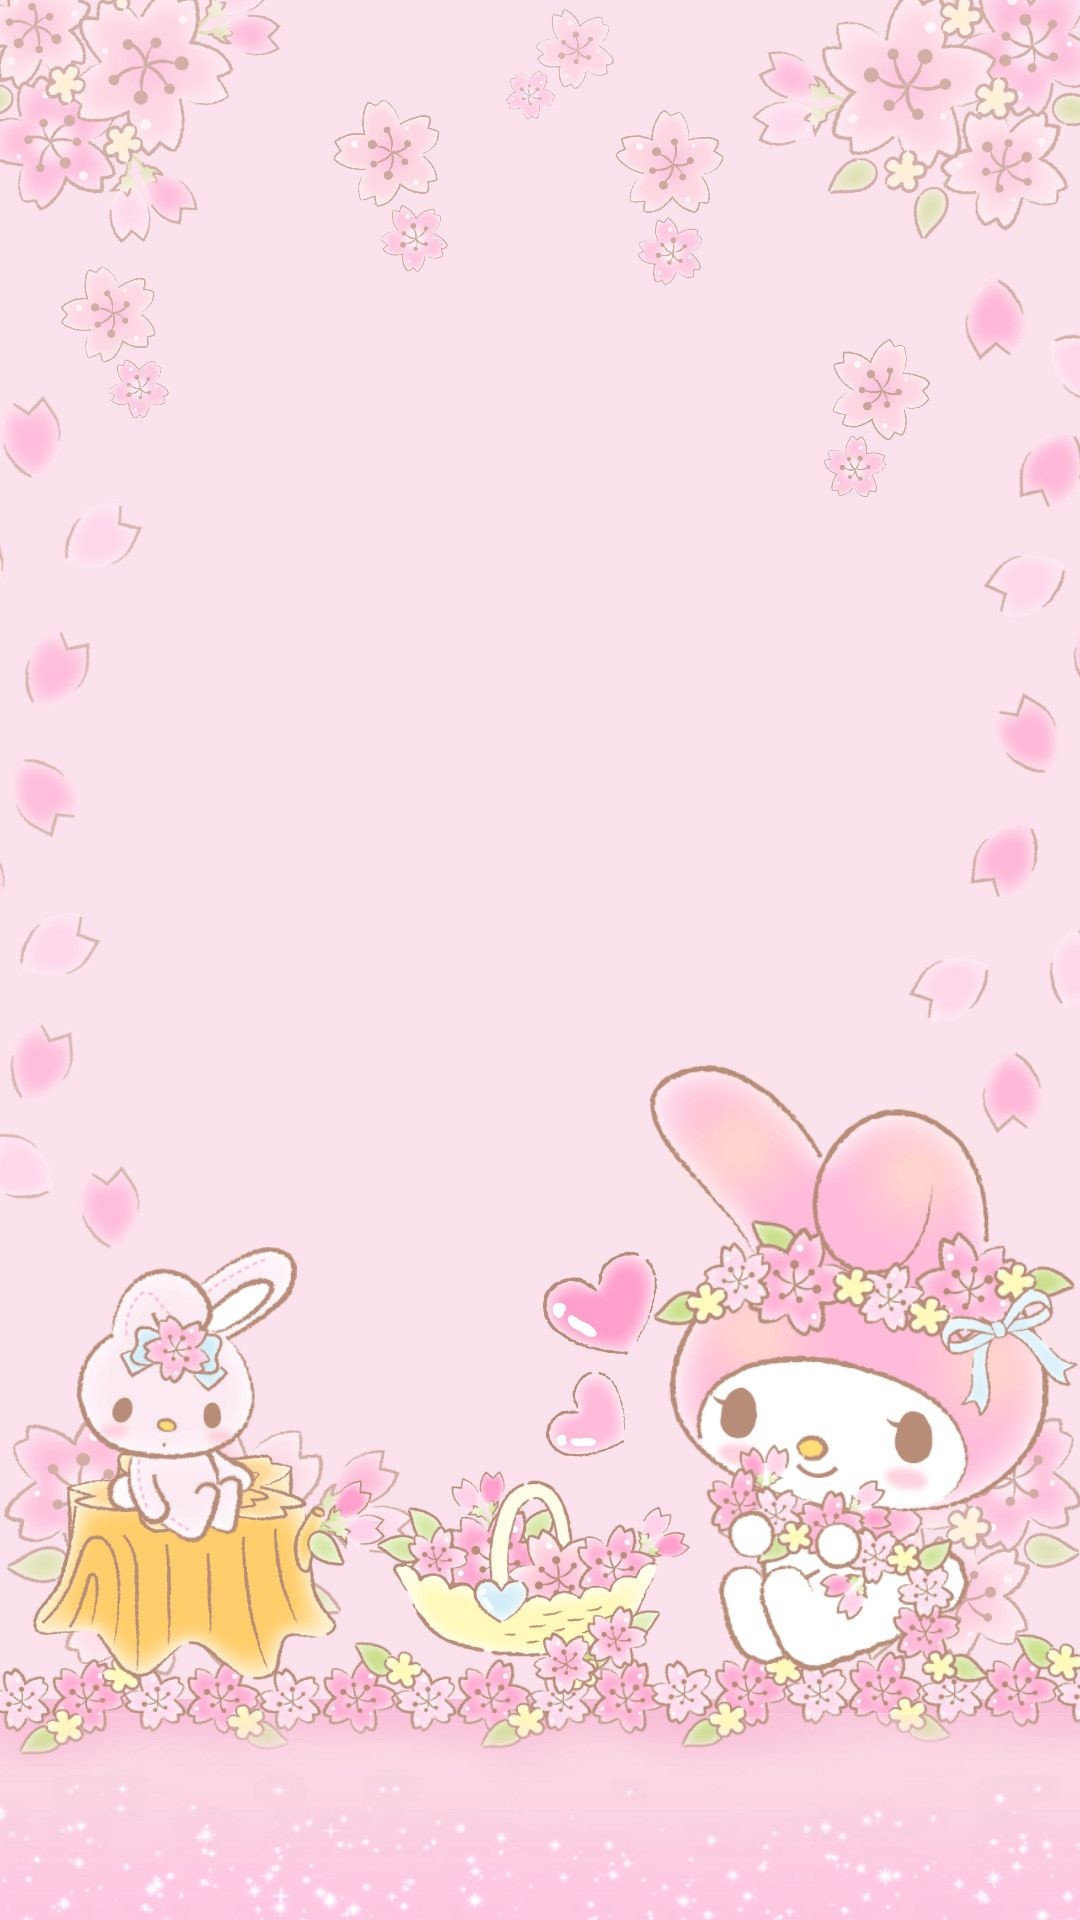 Hello Kitty: Has a best friend named My Melody who is depicted as a pink anthropomorphic rabbit. 1080x1920 Full HD Background.